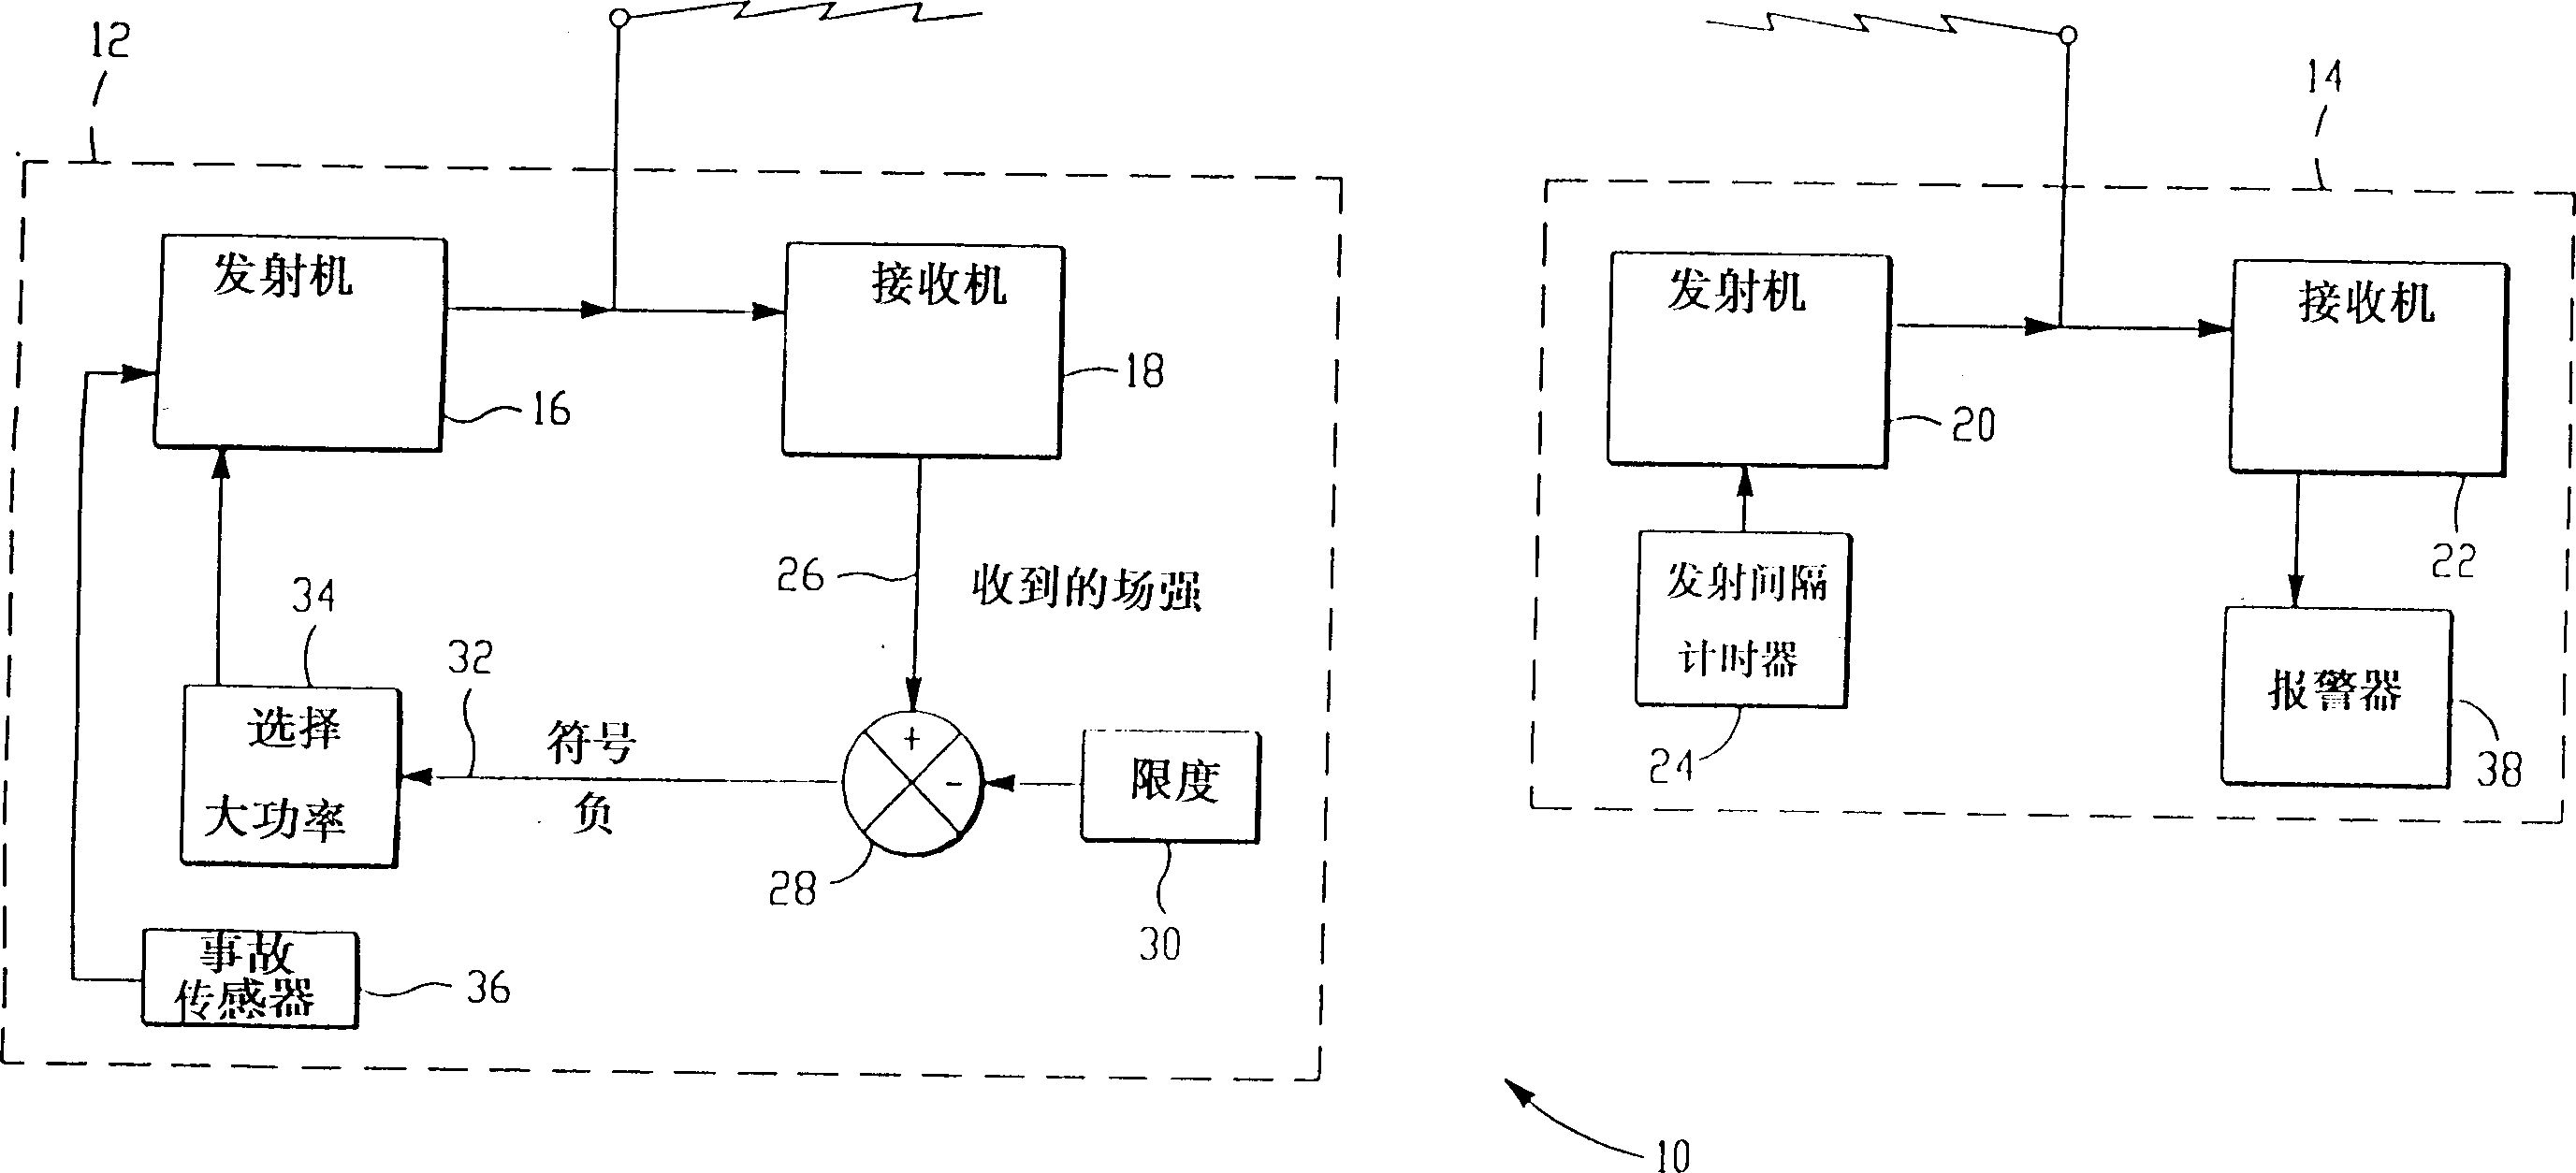 self-positioning remote monitoring system